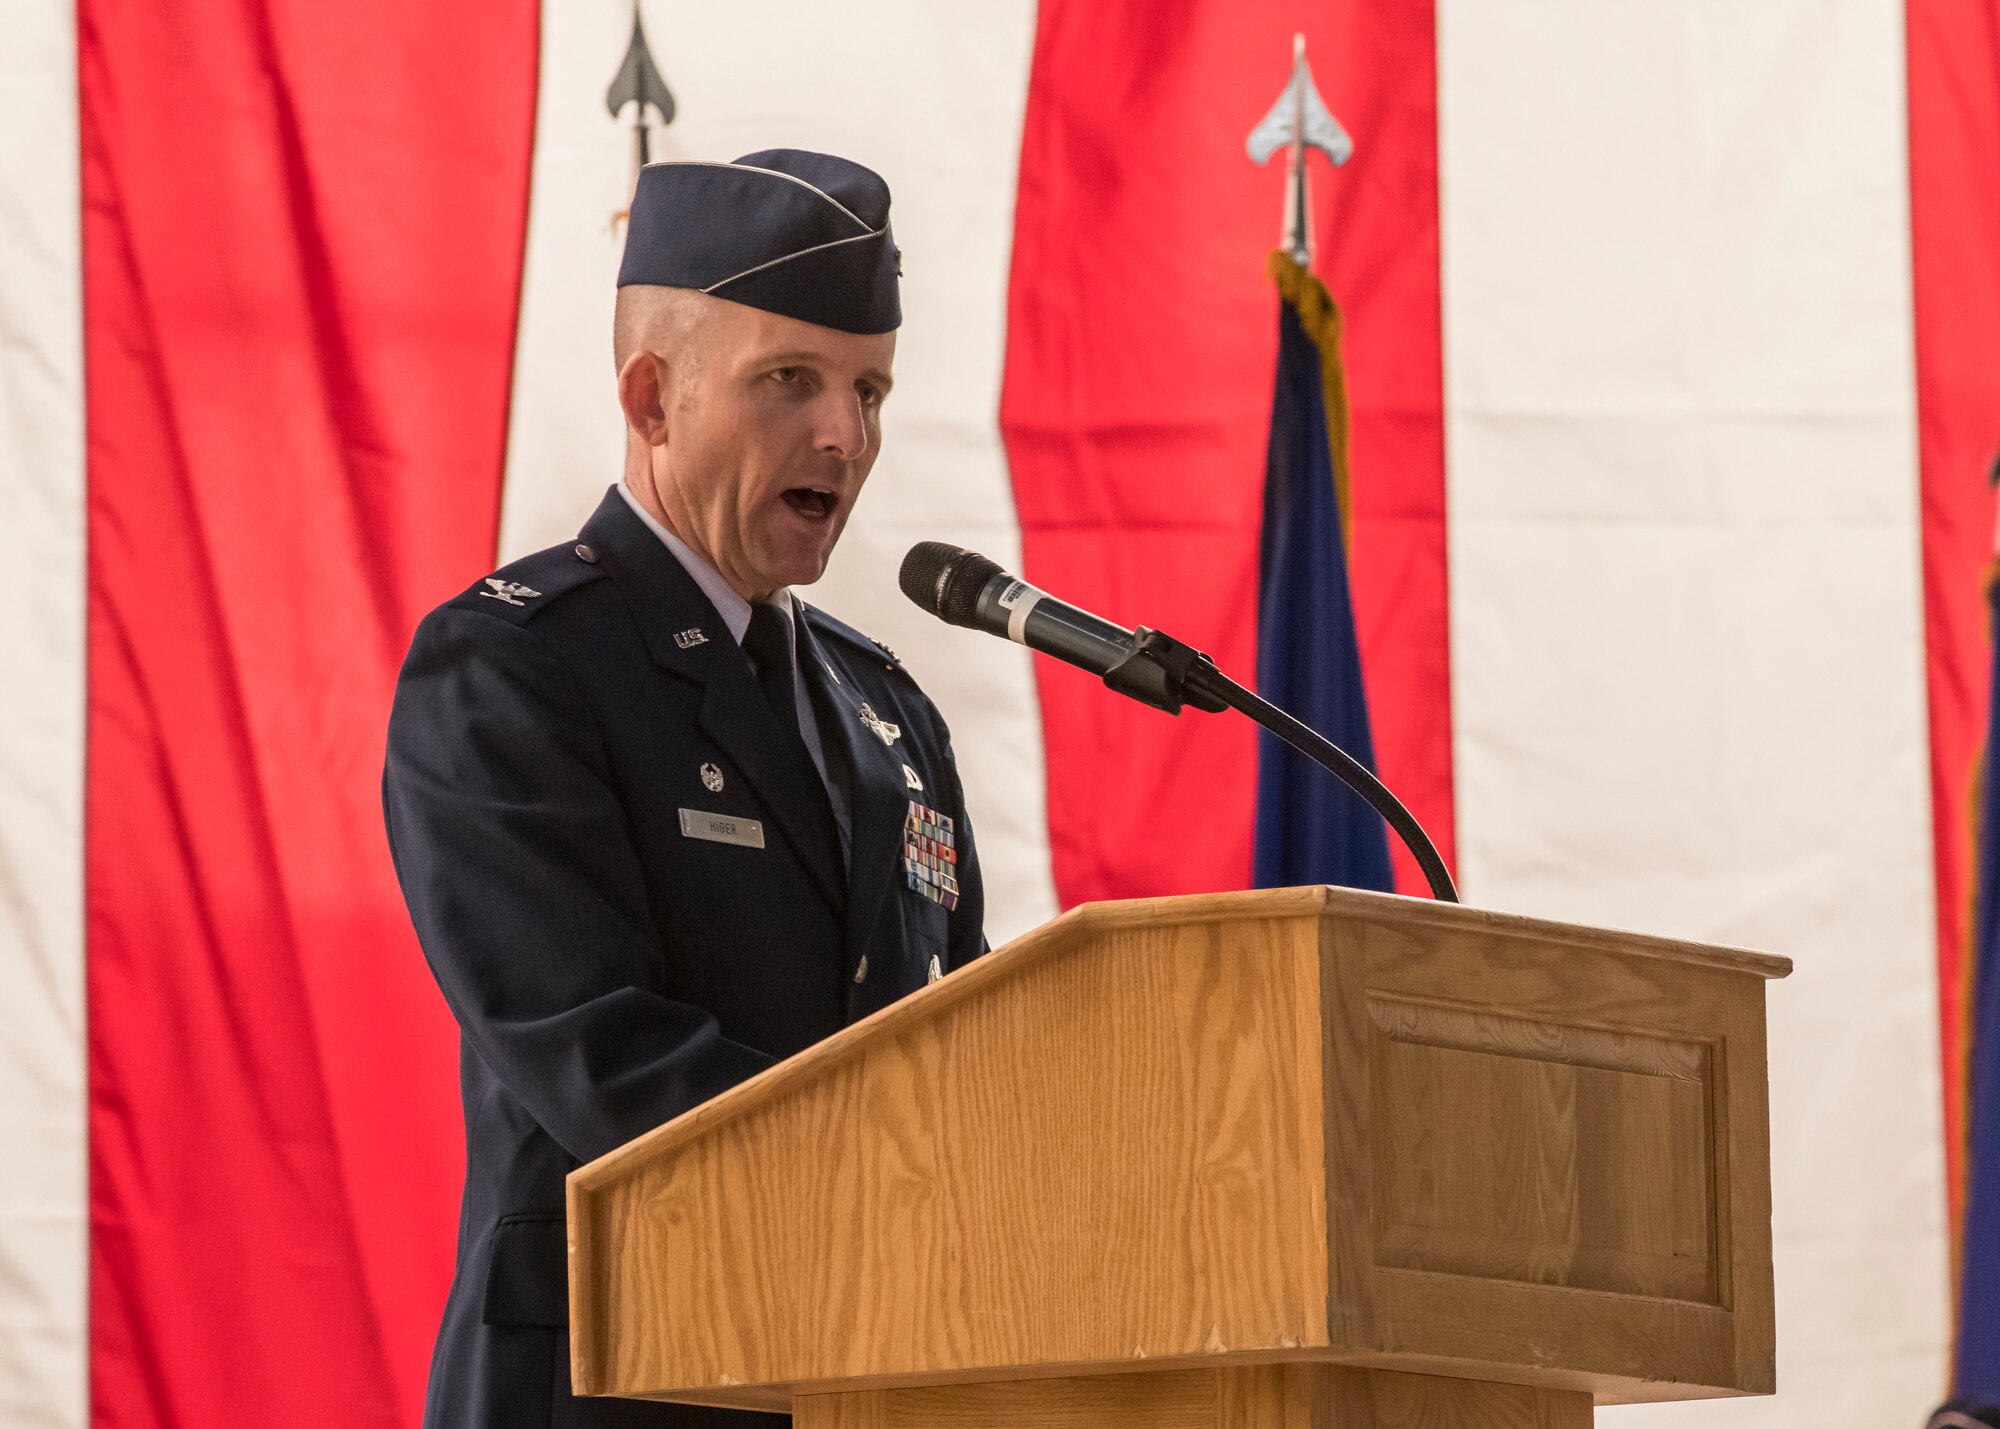 Col. Matthew Higer, the incoming 412th Test Wing Commander, gives his remarks during the Wing’s Change of Command Ceremony at Edwards Air Force Base, California, Feb. 5. (Air Force photo by Giancarlo Casem)